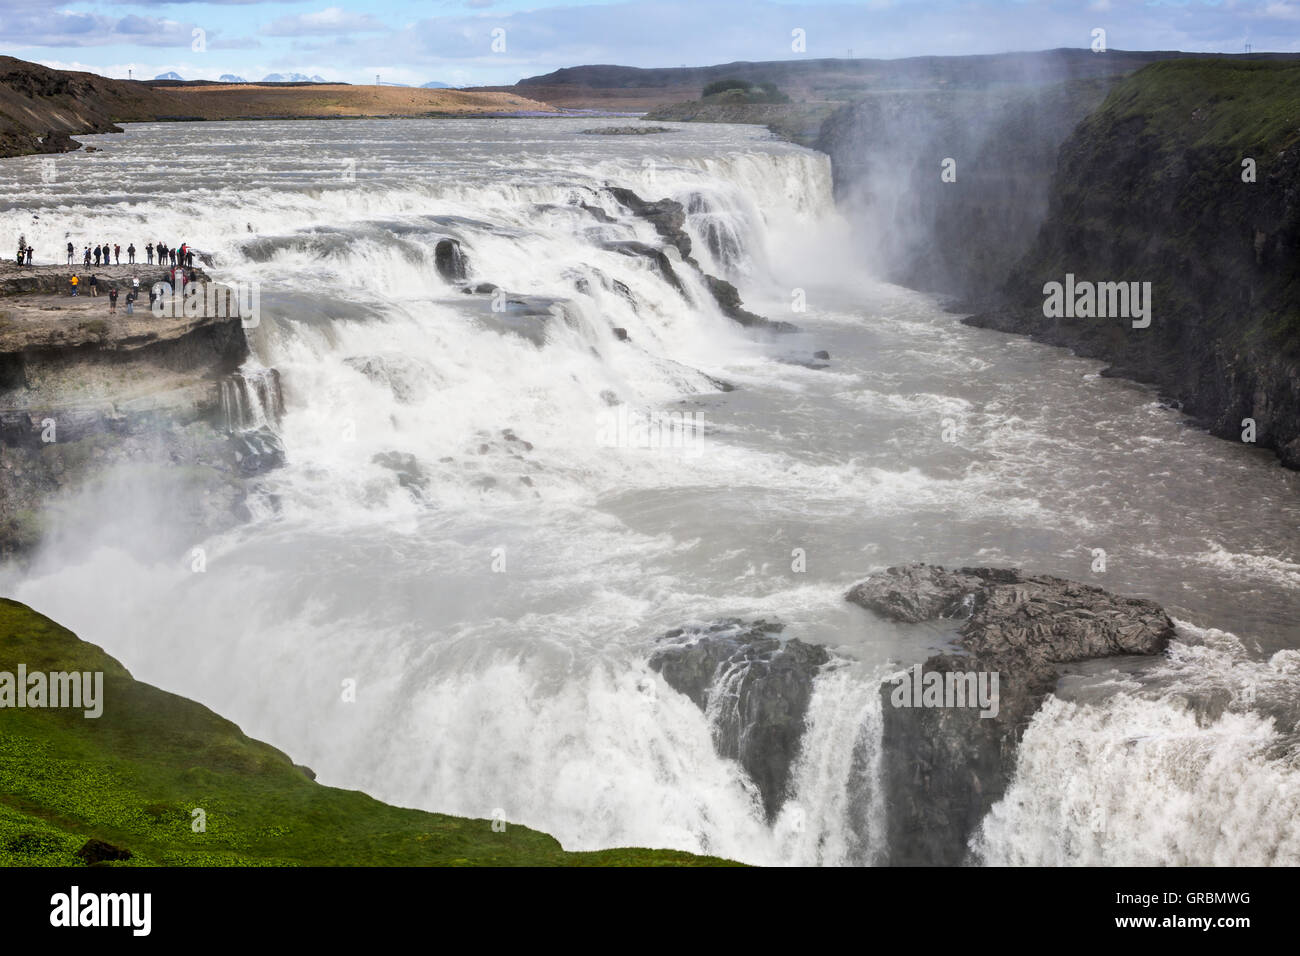 Gullfoss Falls, Golden Falls, drops 32 meters, 105 ft into a canyon, Iceland, South West Iceland, Golden Circle tour Stock Photo